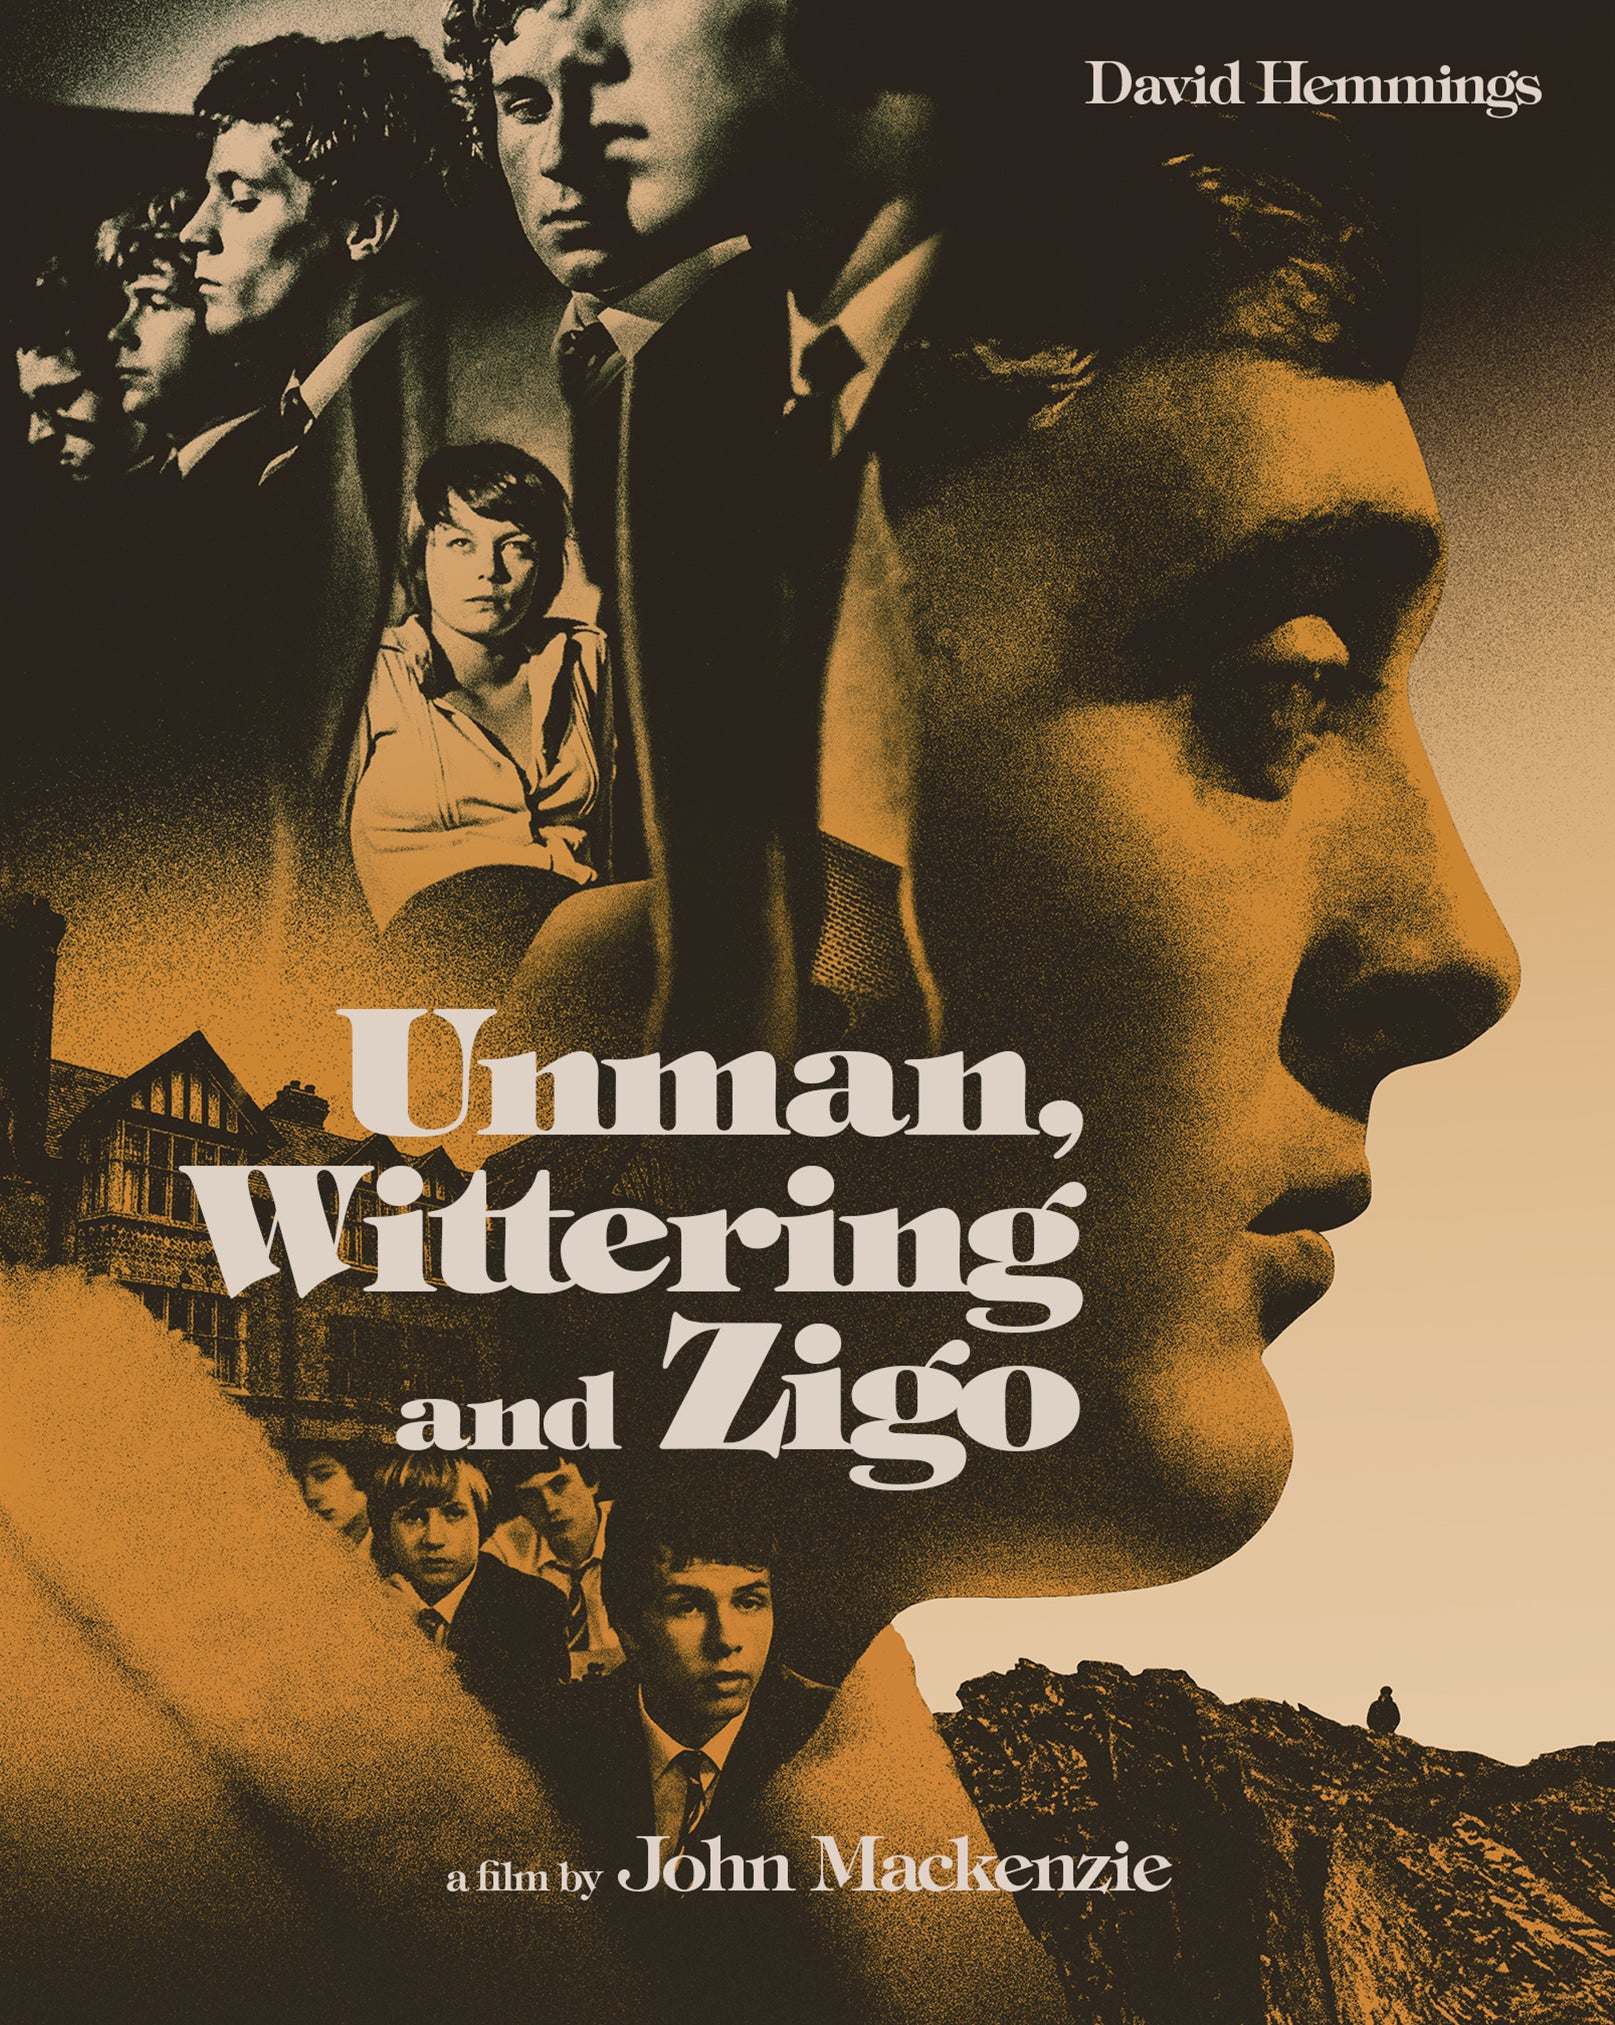 UNMAN WITTERING AND ZIGO (LIMITED EDITION) BLU-RAY